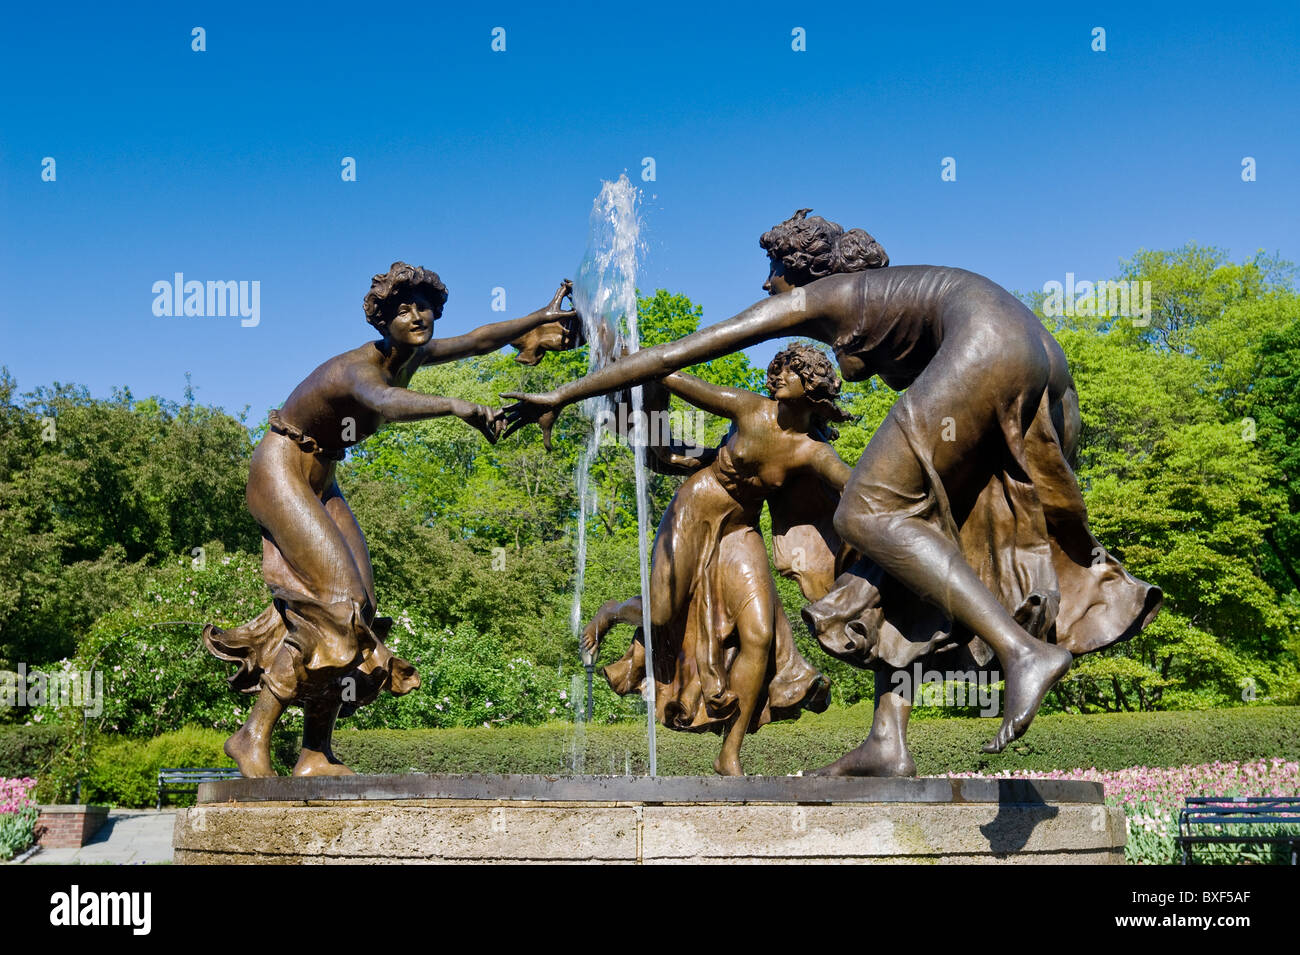 Conservatory Garden in Central Park, New York City with The Three Dancing Maidens statue by sculptor Walter Schott. Stock Photo